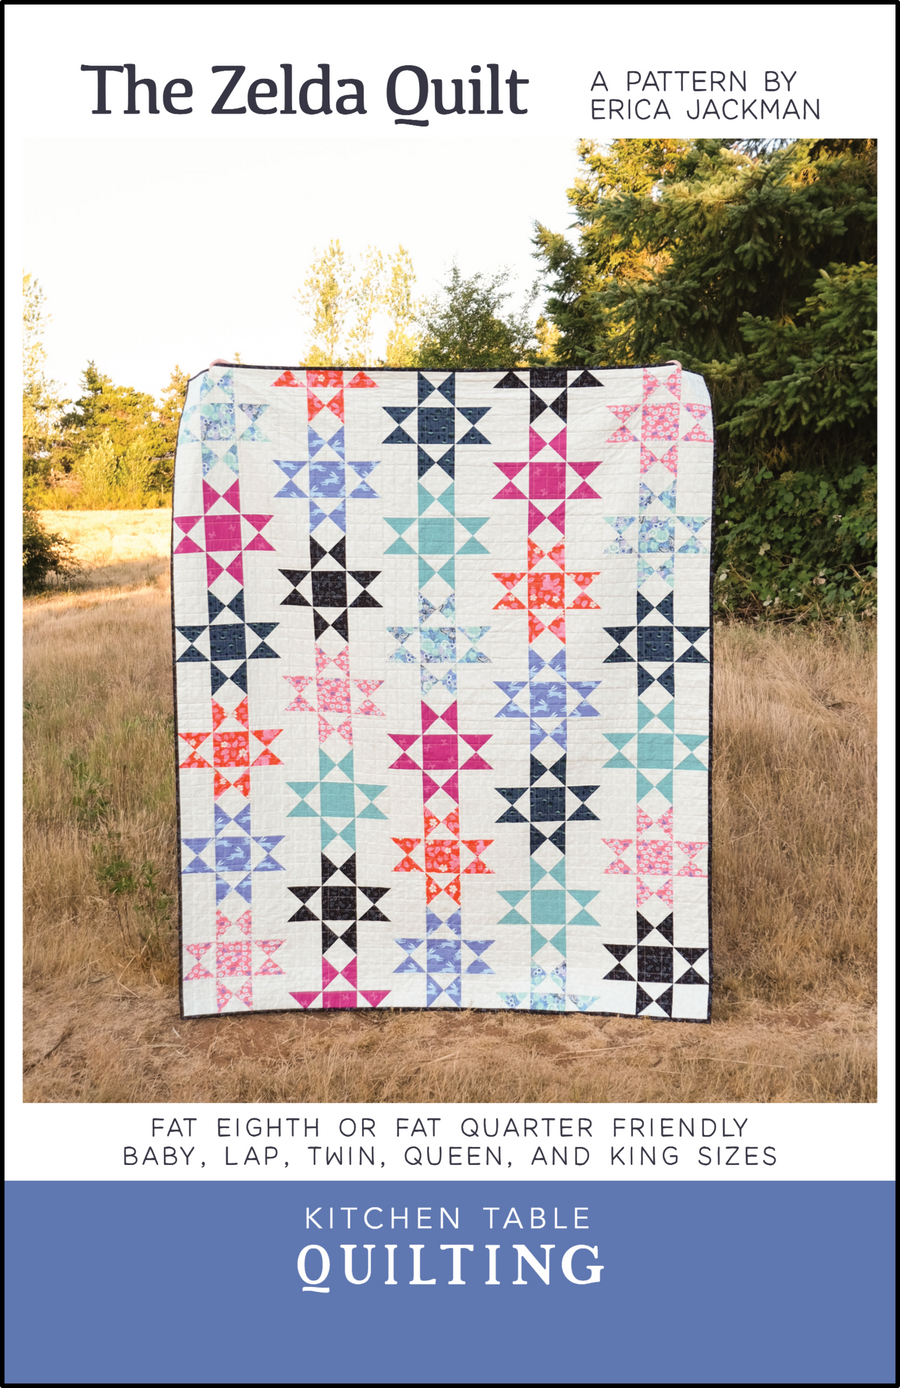 The Zelda Quilt Pattern in Backyard by Ruby Star Society. This quilt is fat eighth or fat quarter friendly and has instructions for baby, lap, twin, queen, and king sizes.